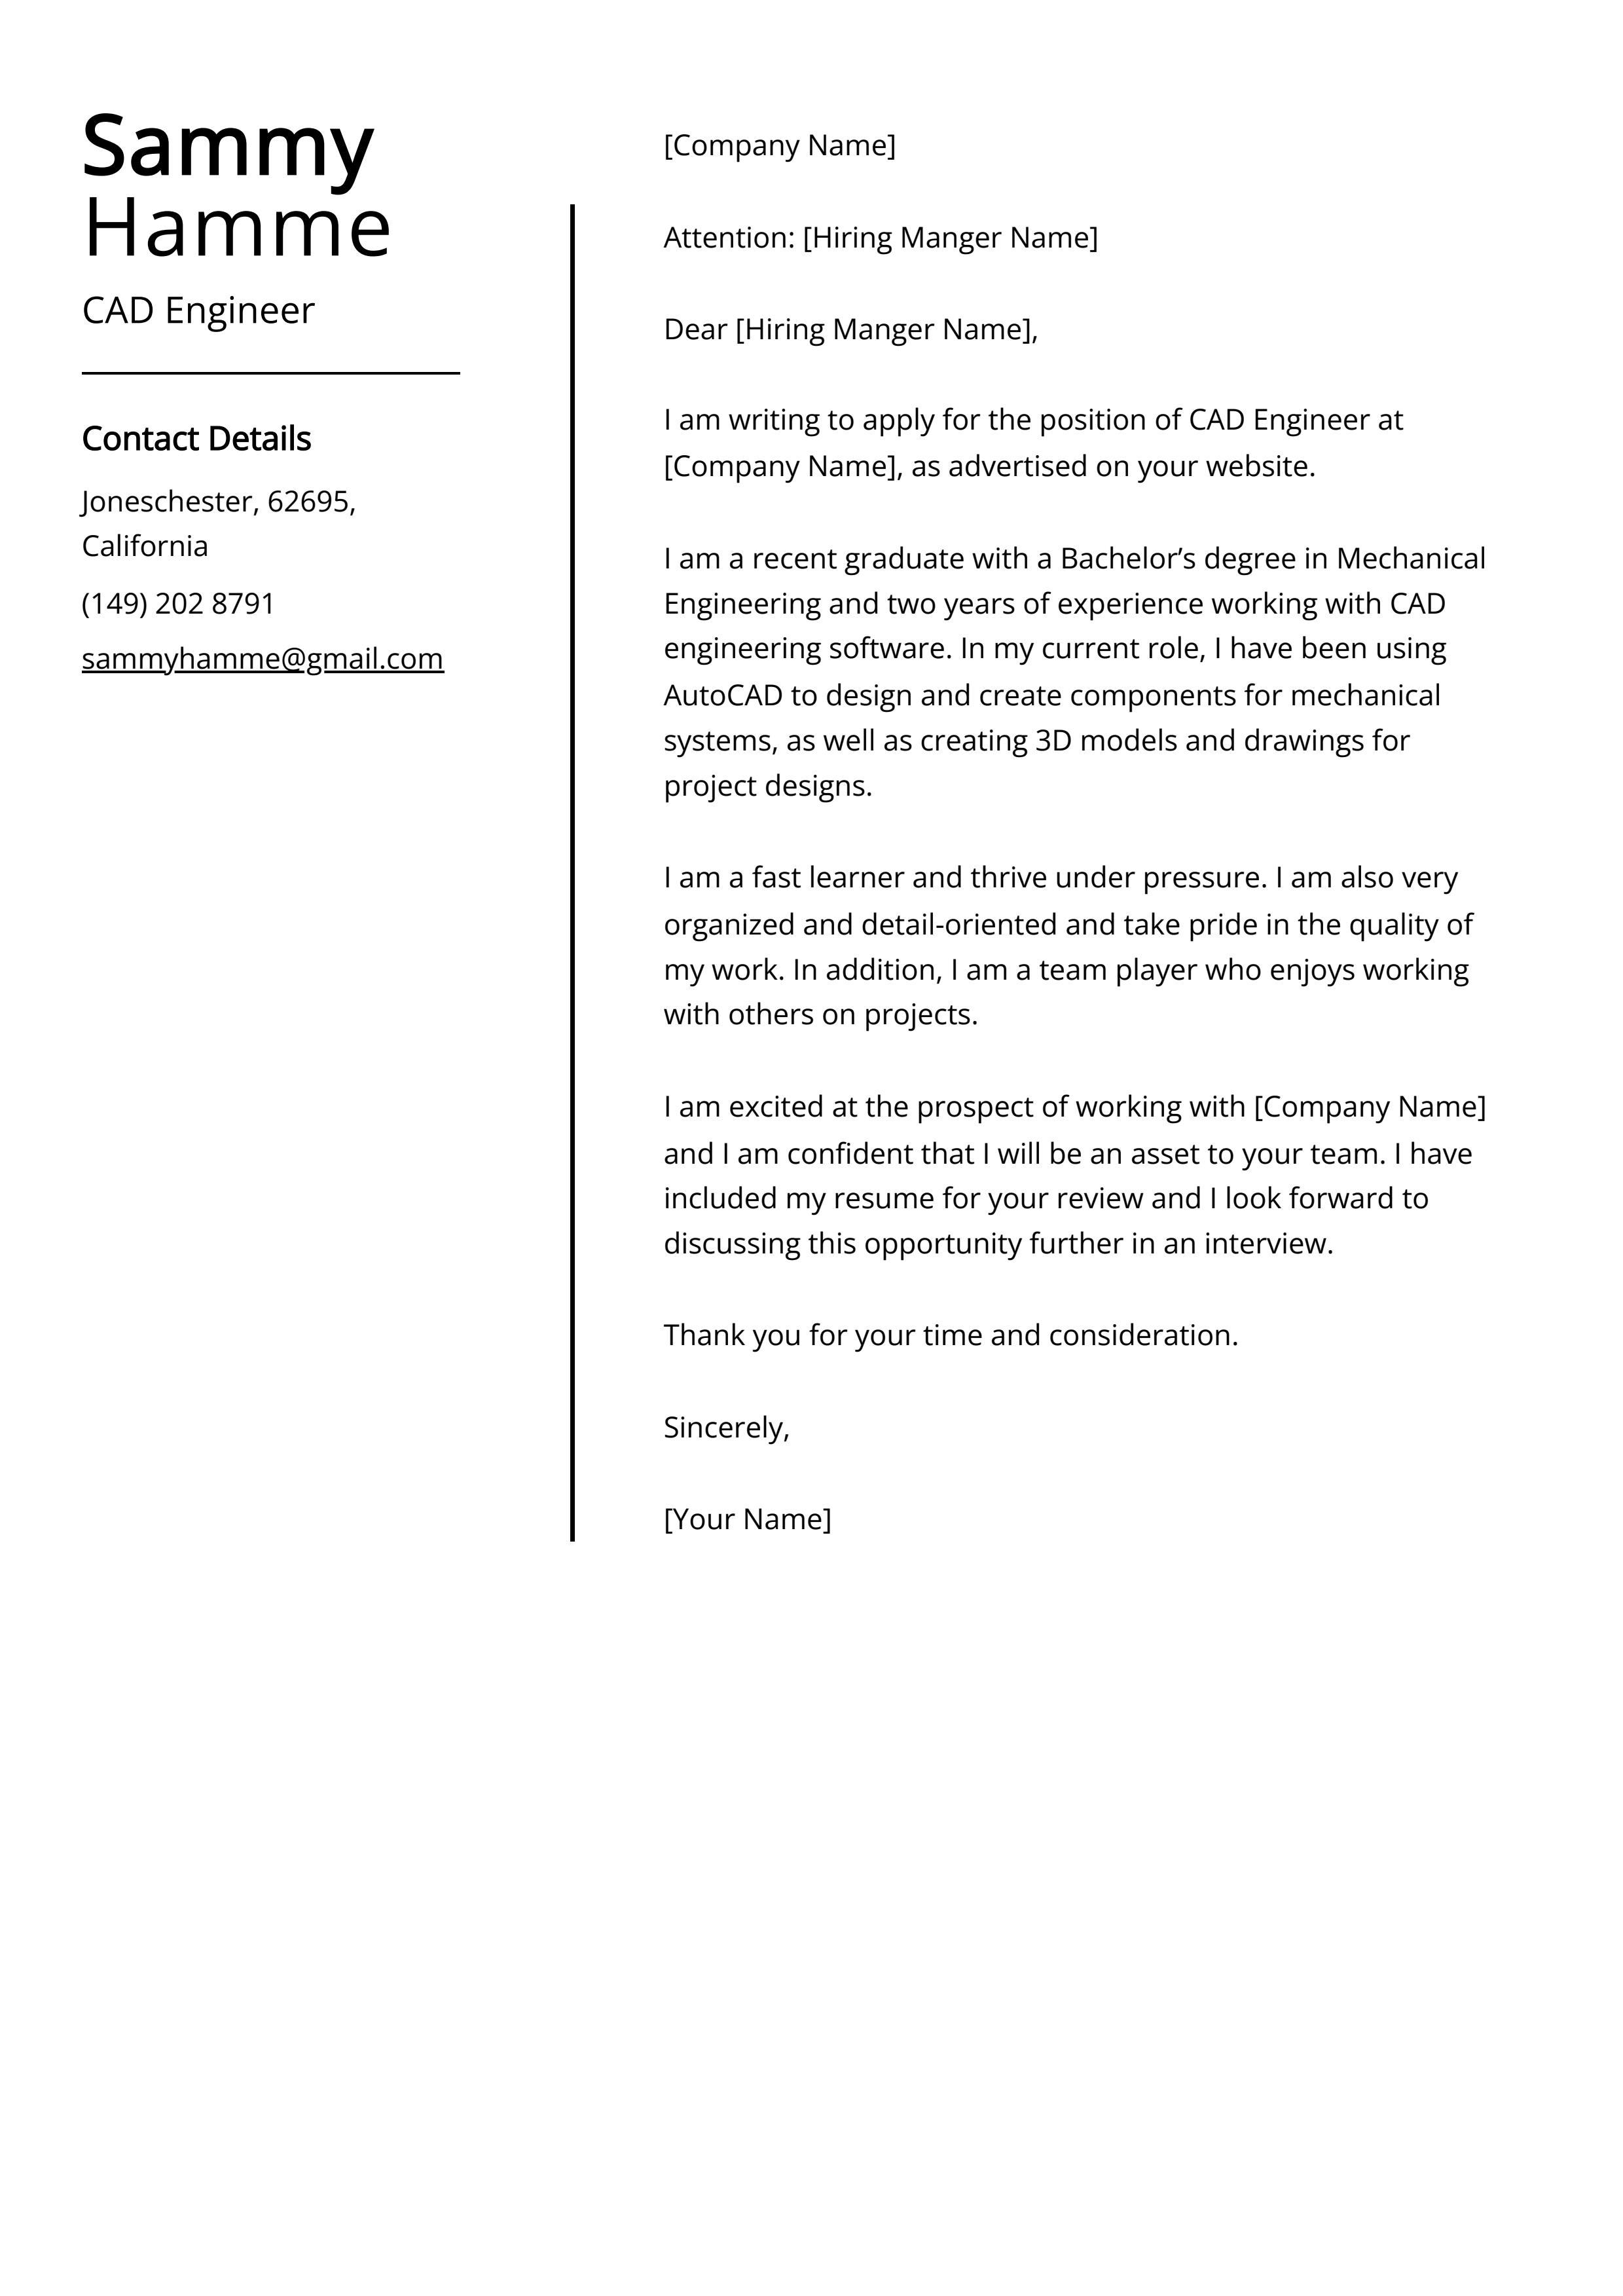 CAD Engineer Cover Letter Example